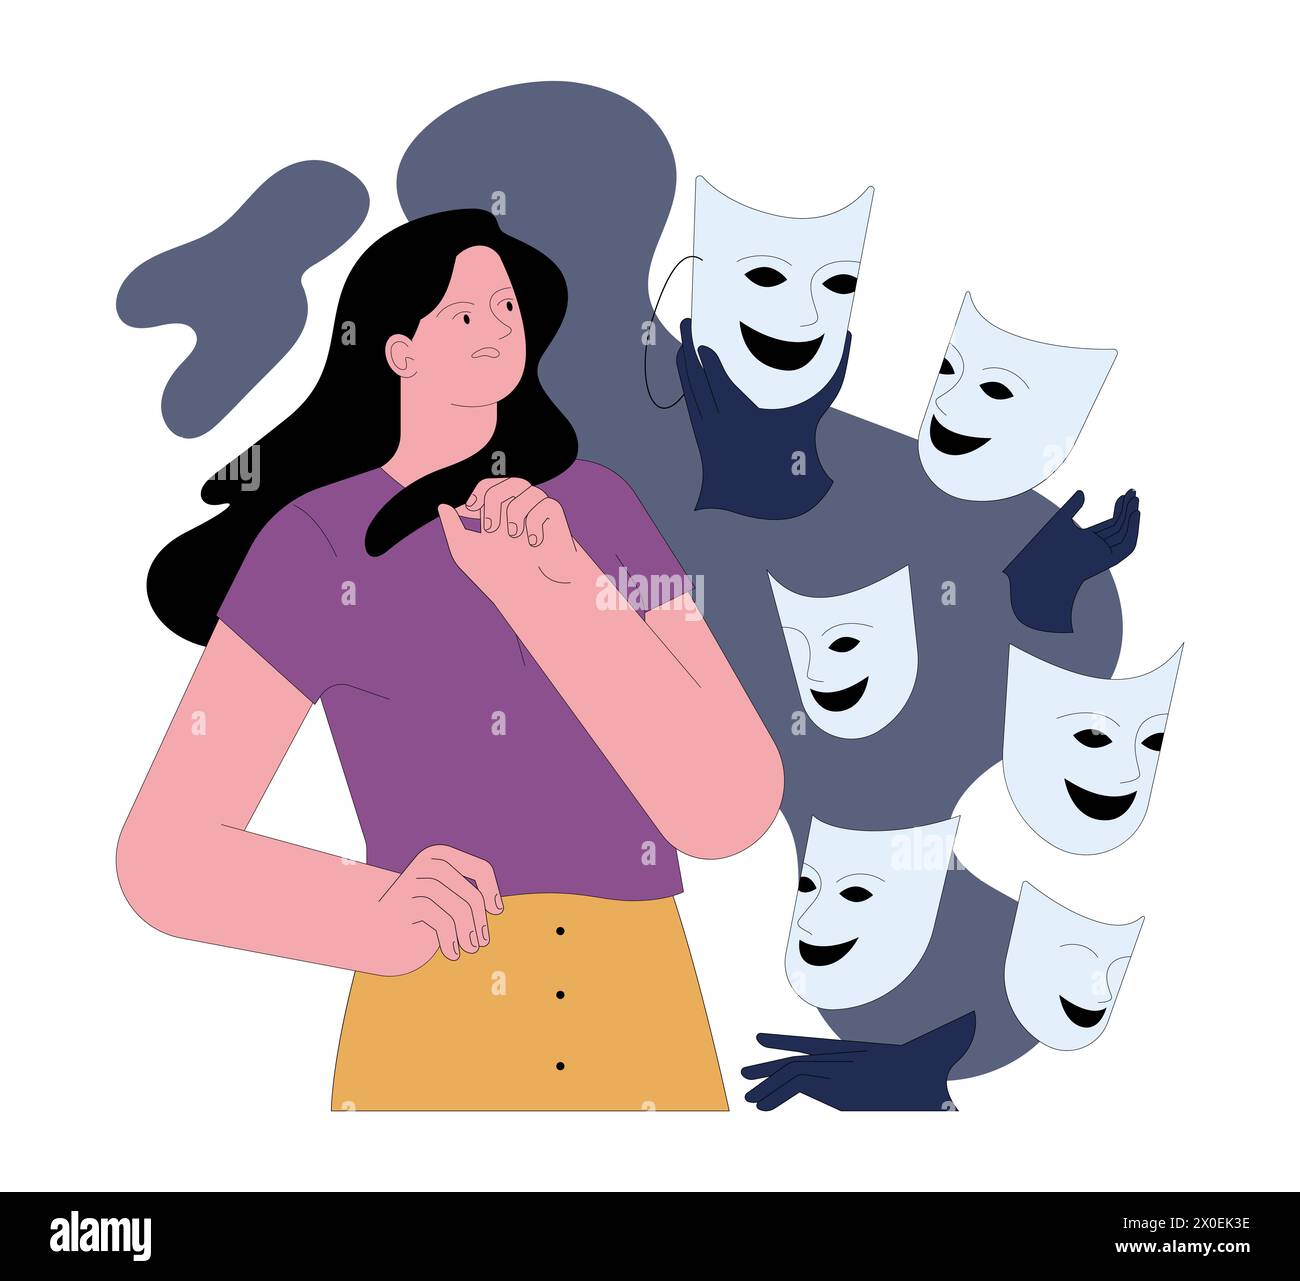 Fear of losing individuality. Frightened contemplative young woman surrounded by identical masks. Struggle to maintain uniqueness among conformity. Flat vector illustration Stock Vector